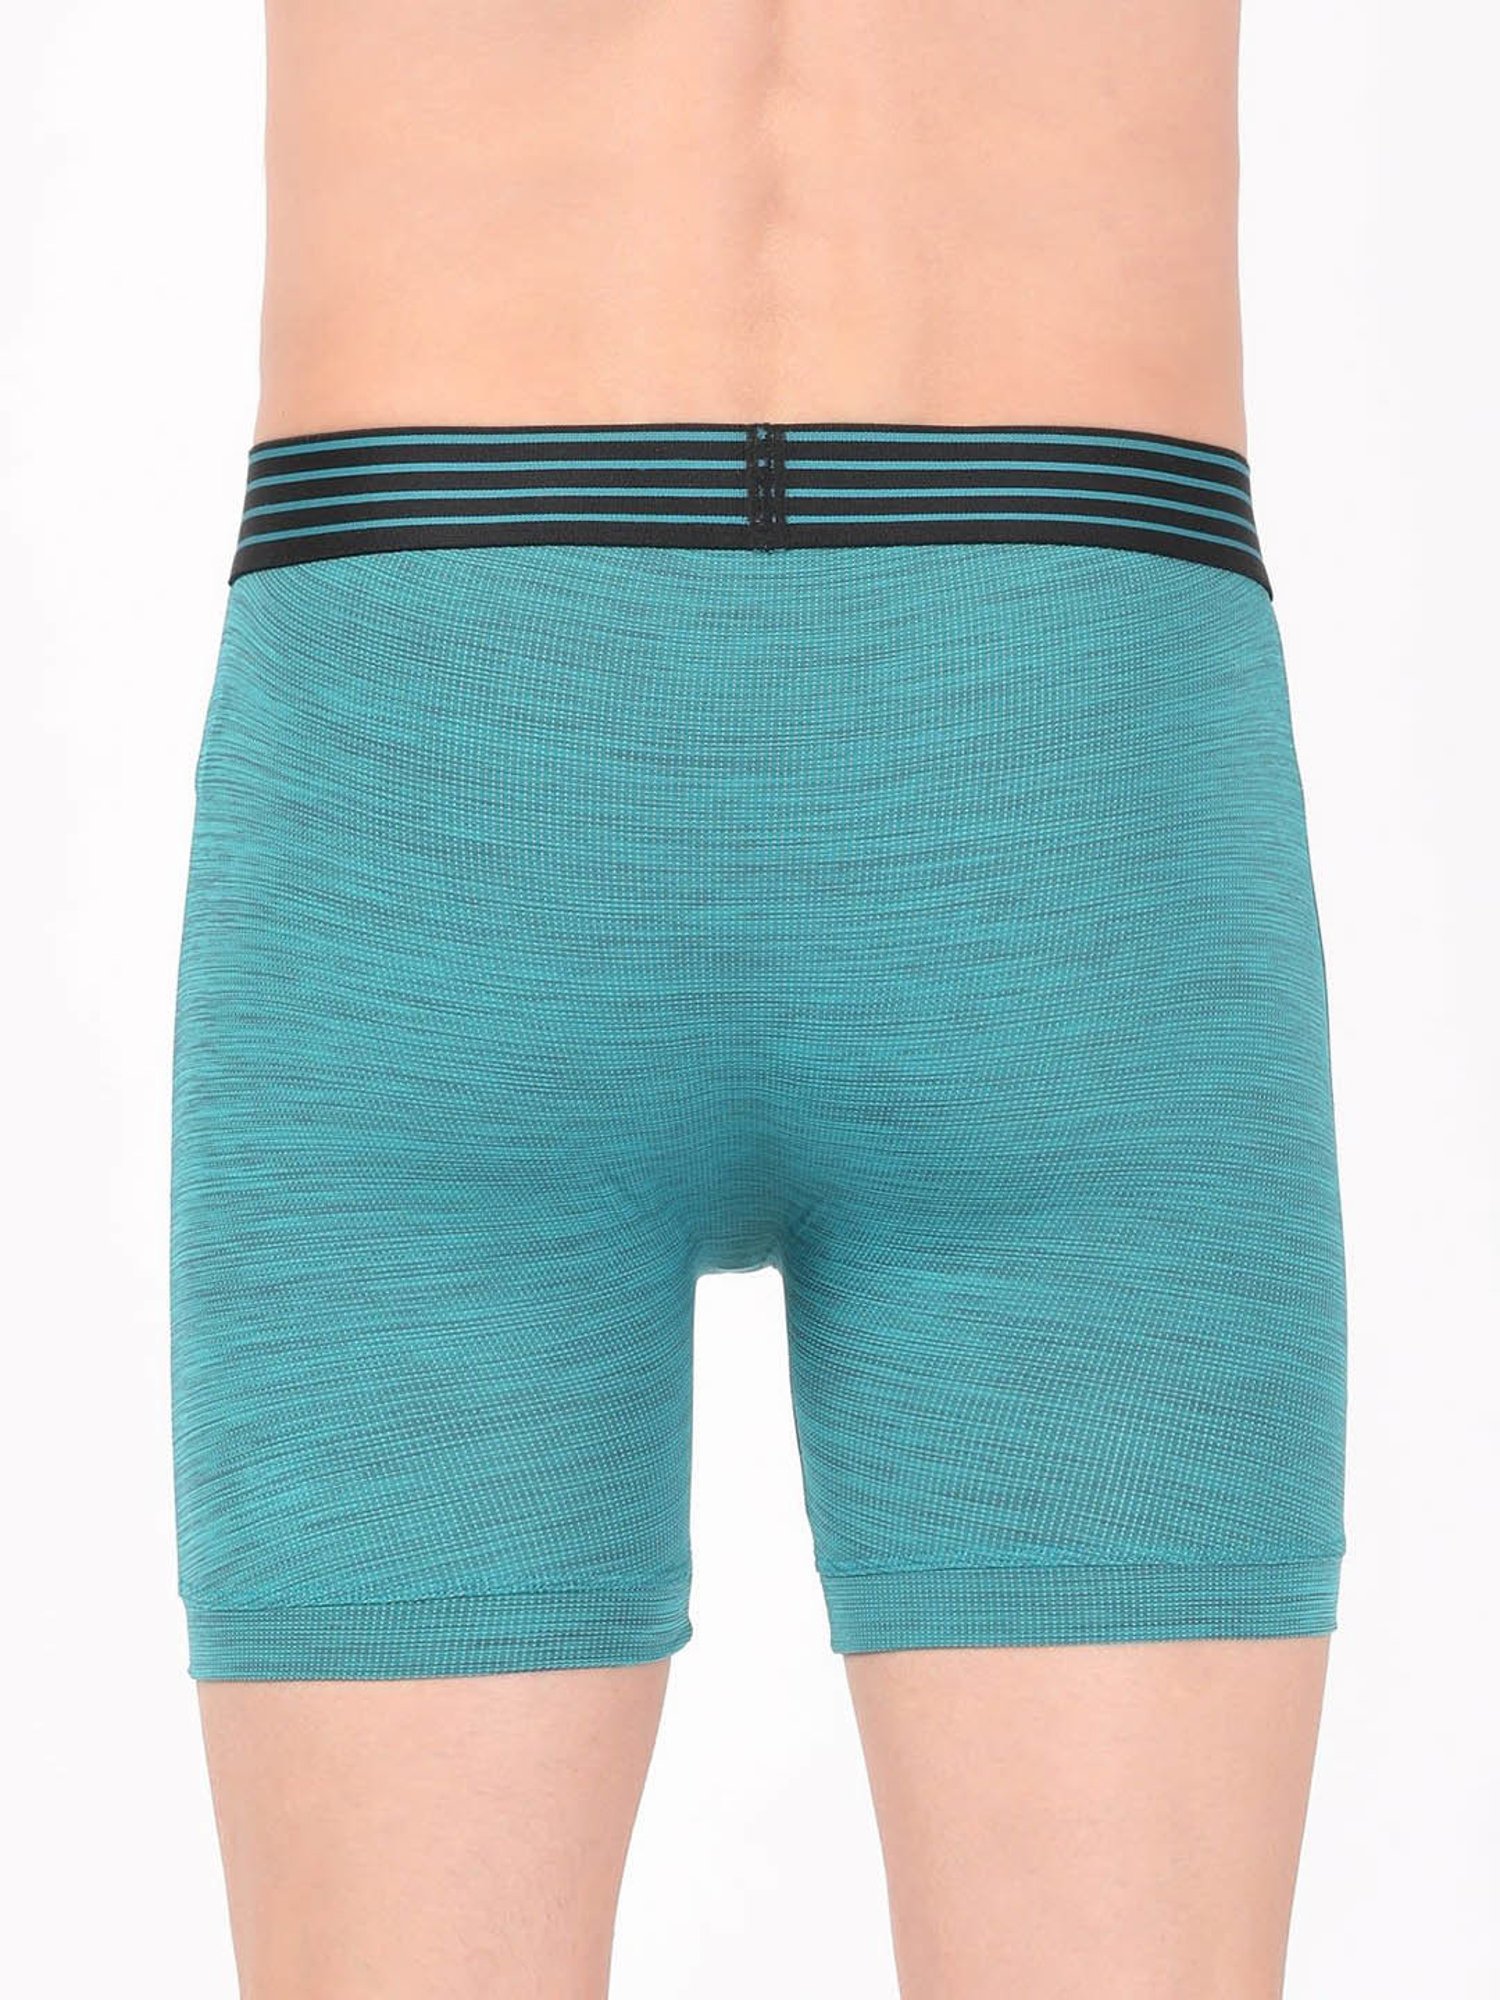 Buy Freecultr Turquoise Printed Briefs for Men's Online @ Tata CLiQ